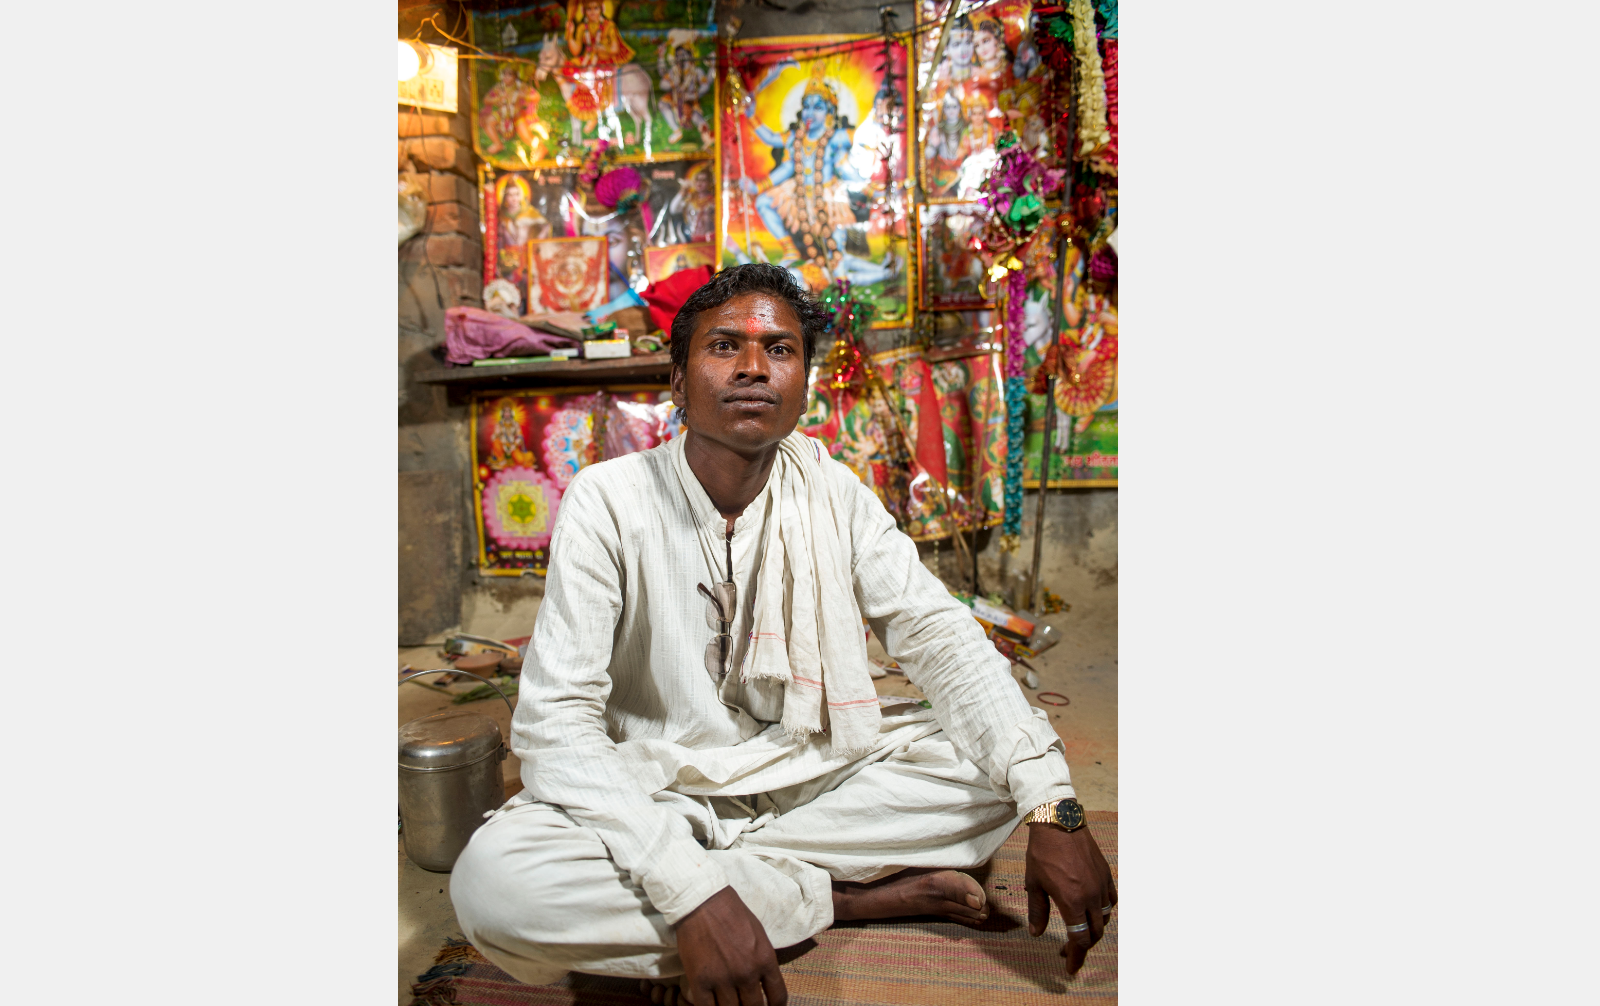  Rajesh Vanvasi has come a long way since he and his family were rescued from a kiln eight years ago and left for dead below a bridge by the kiln’s vengeful owner. In February, he was elected representative of his home village in Uttar Pradesh. Although he lives a busy life, he makes time to pray twice a day at his private shrine. “I wish for my and everyone’s troubles to go away,” he says. “I feel calmer now that I pray.”  Image by Ann Hermes. India, 2016.